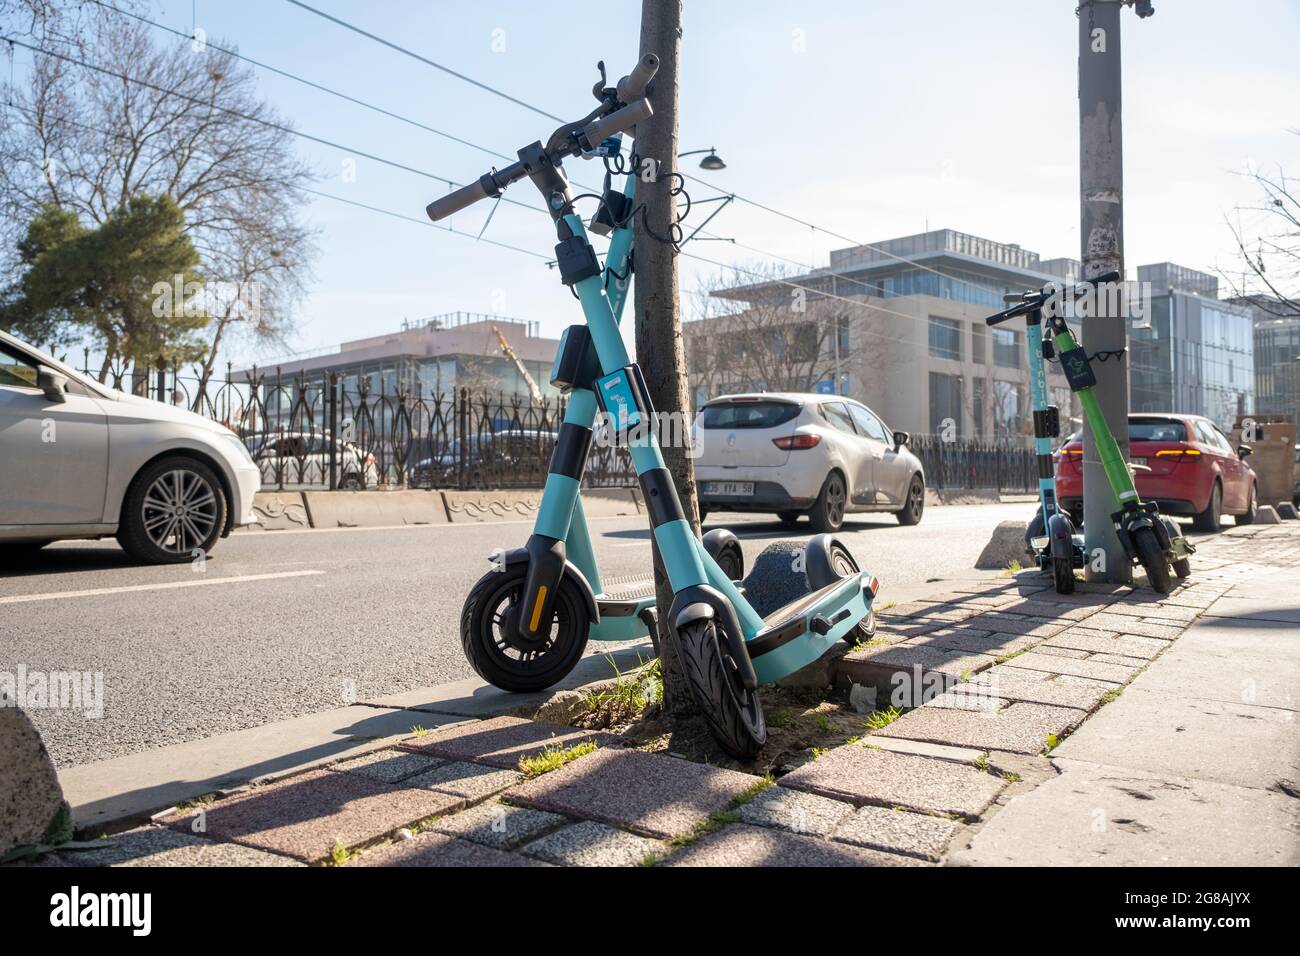 puede federación Zapatos Findikli, Istanbul, Turkey - 02.26.2021: some scooters from different  Turkish electric scooter rental companies along the way Stock Photo - Alamy